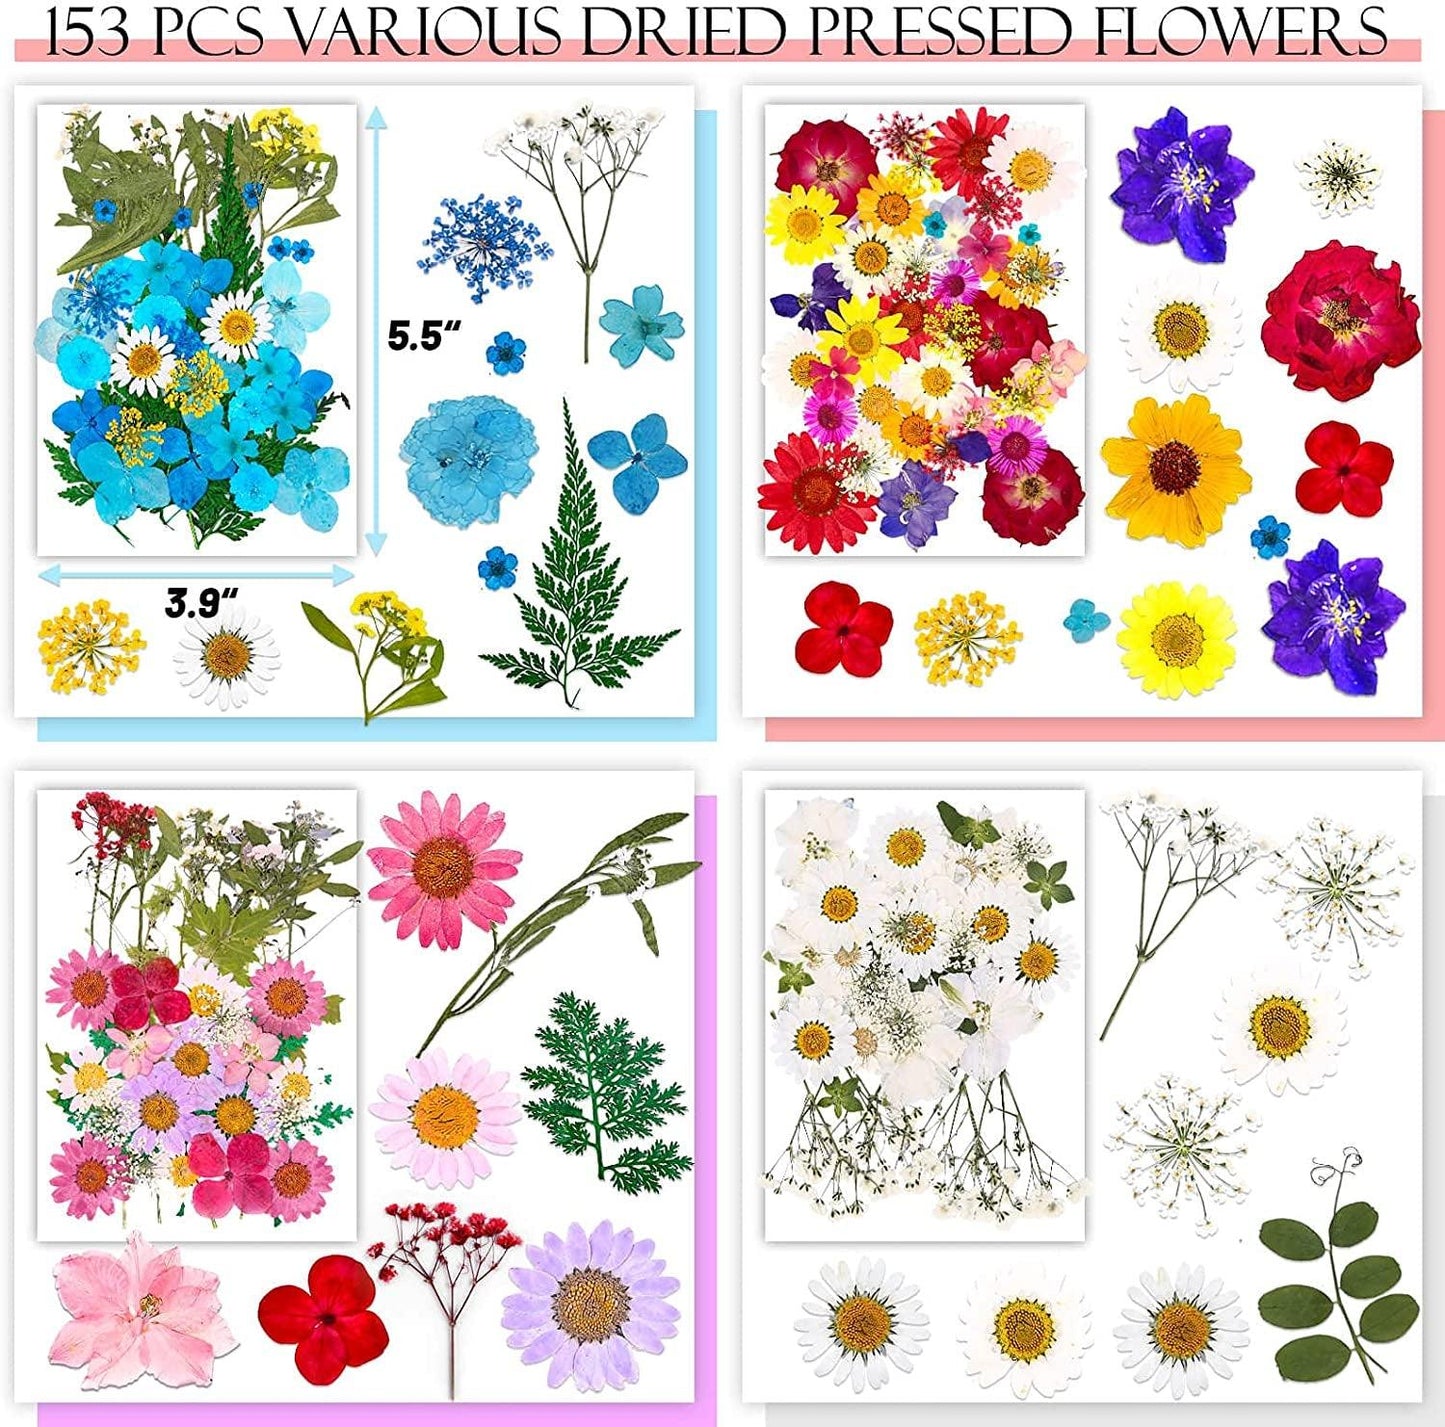 153Pcs Dried Pressed Flowers for Resin, Real Pressed Flowers with Tweezers, Multiple Colorful Resin Dry Flowers Bulk for Craft, Resin Mold, Jewelry Making, Candle and Nails Decoration - WoodArtSupply